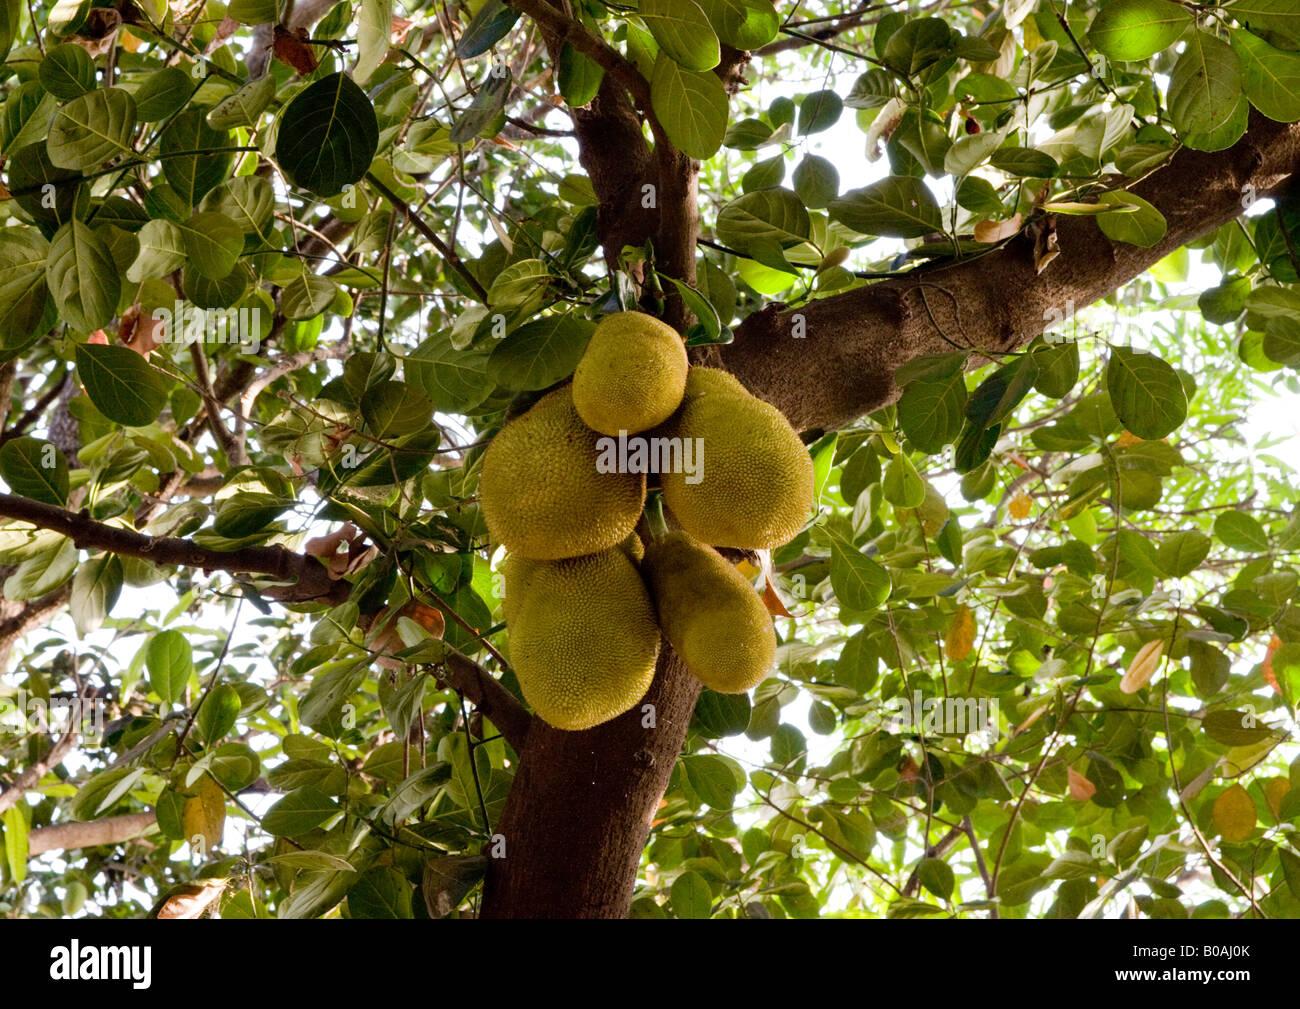 Big jackfruit tree with bunches of young jackfruits and shiny deep green leathery oval leaves on thick sticky branches. Stock Photo